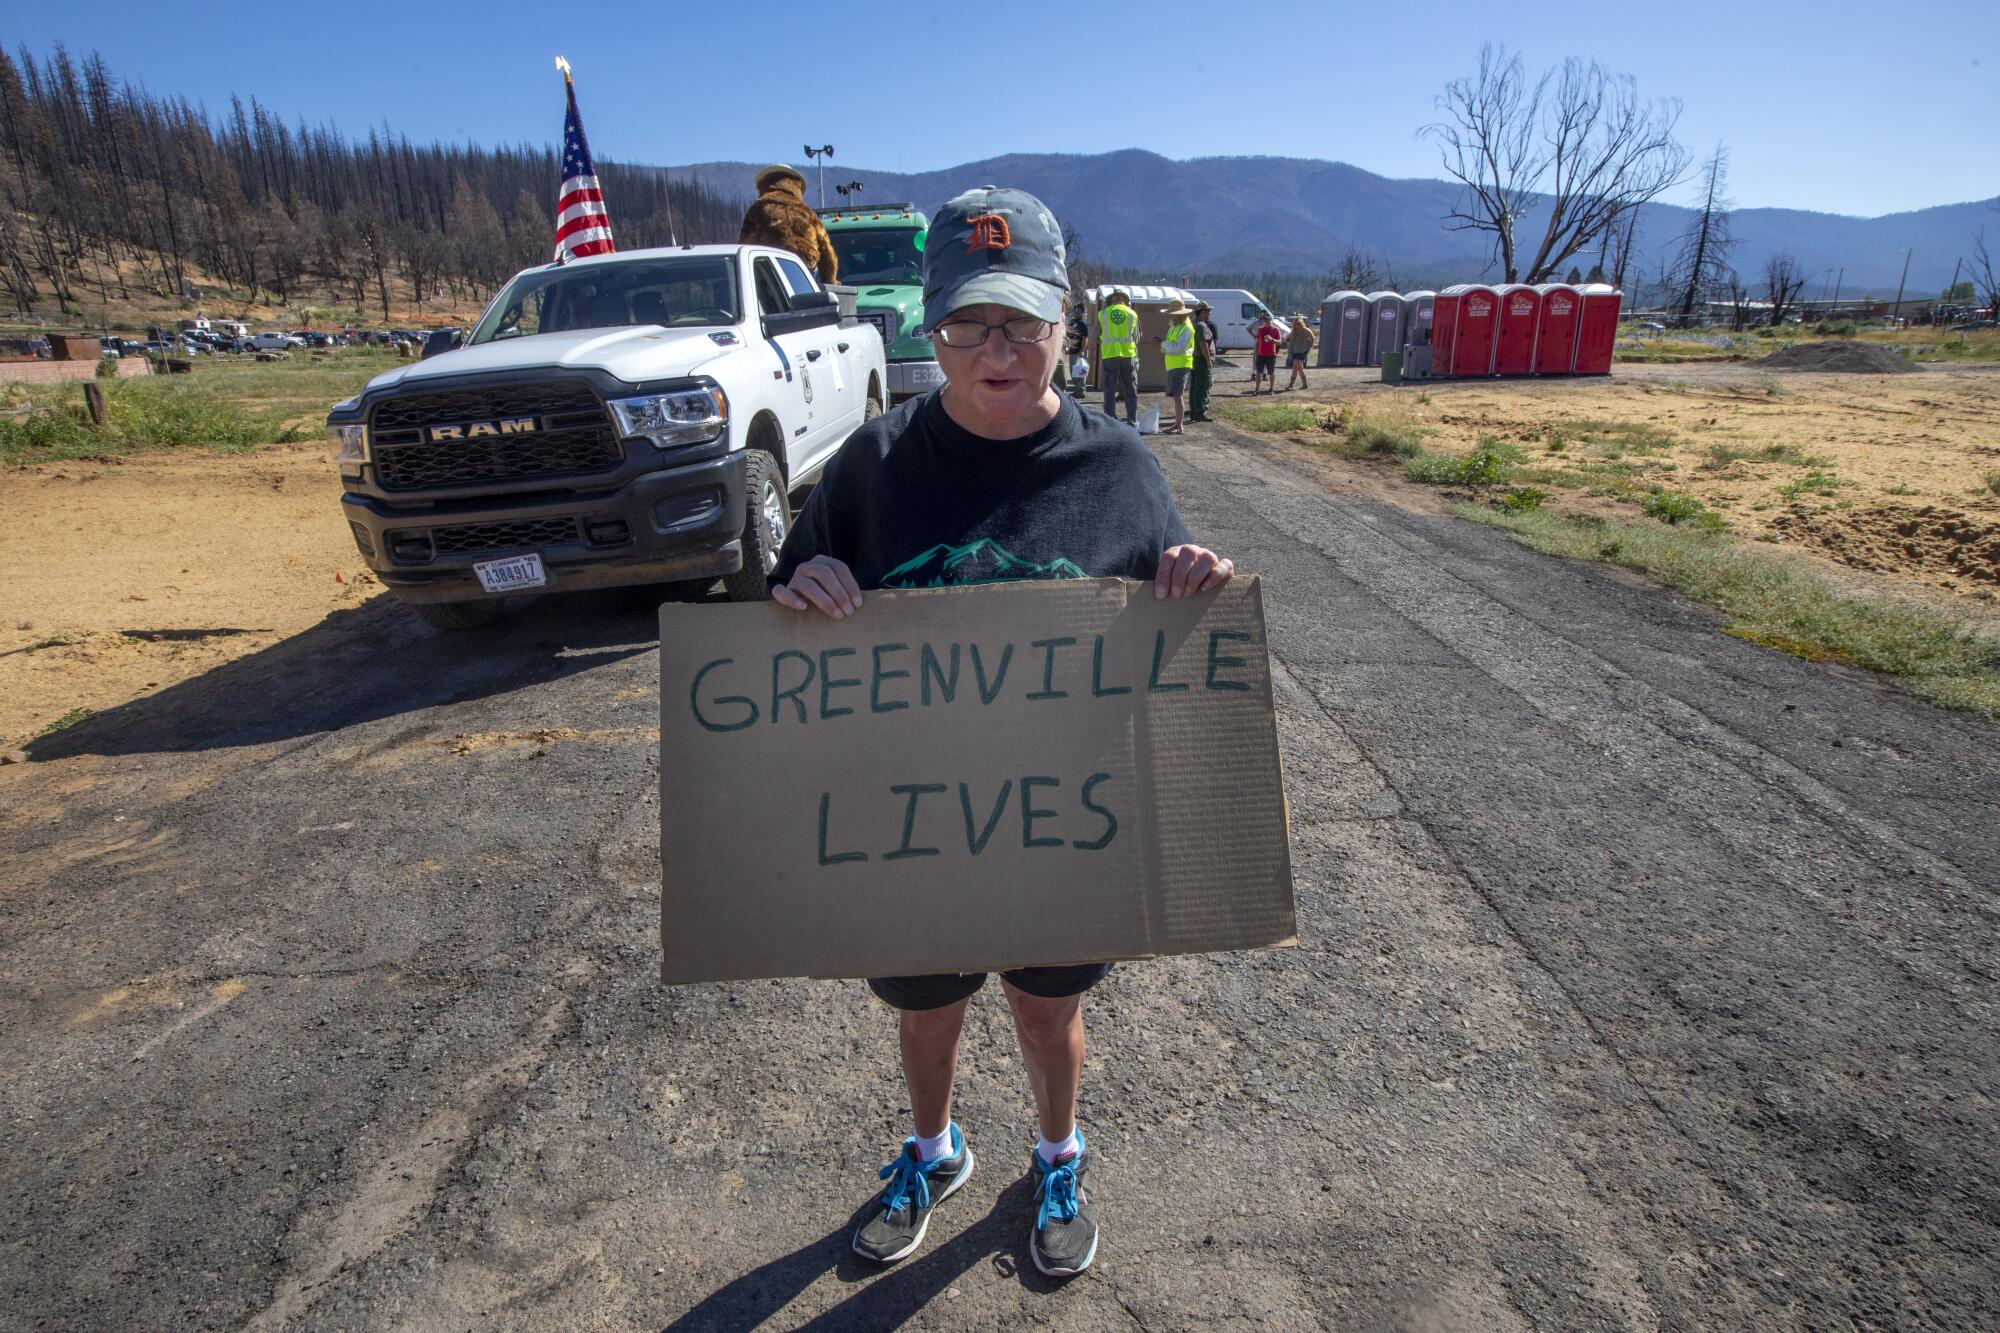 Cathy Buchanan holds a handmade cardboard "Greenville Lives" sign at the start of the Gold Diggers Day parade in Greenville.